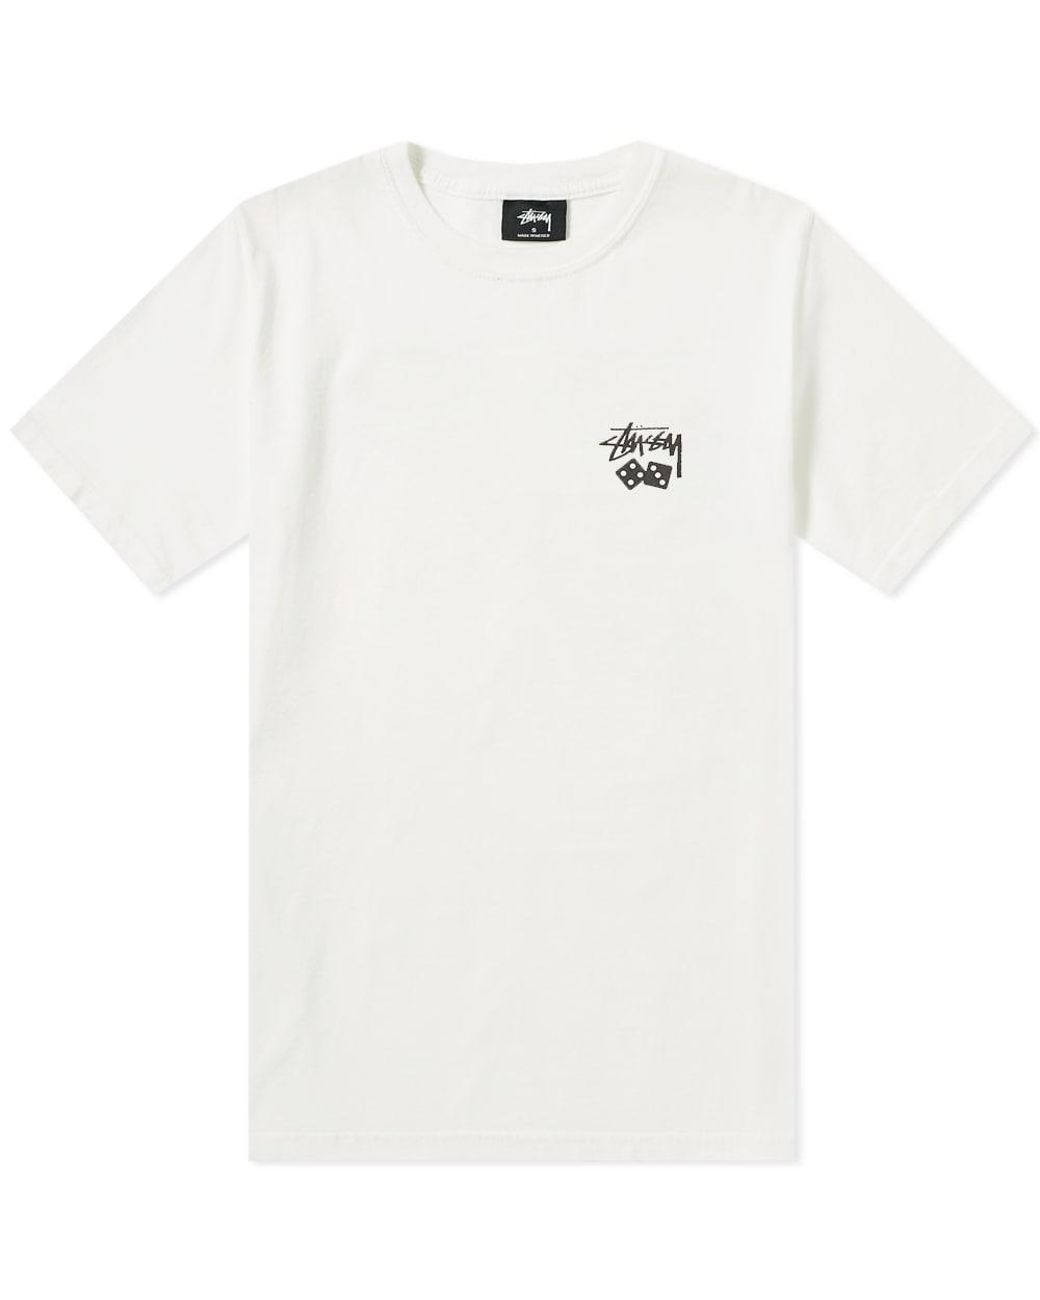 Stussy Cotton Dice Pigment Dyed Tee in White for Men - Lyst